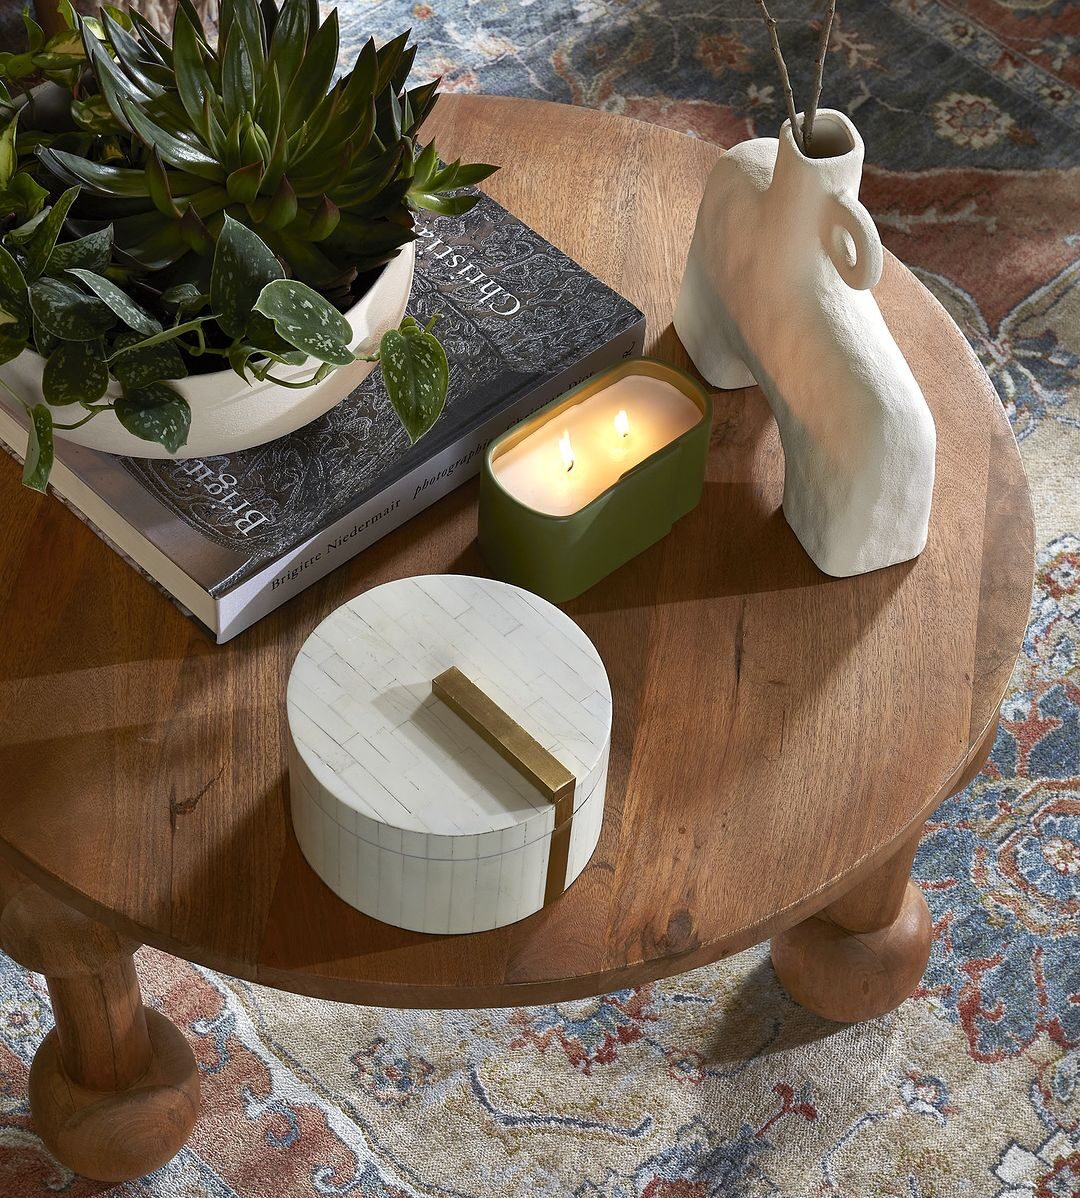 wooden side table with home decor including a candle, vase, plant, and decorative box